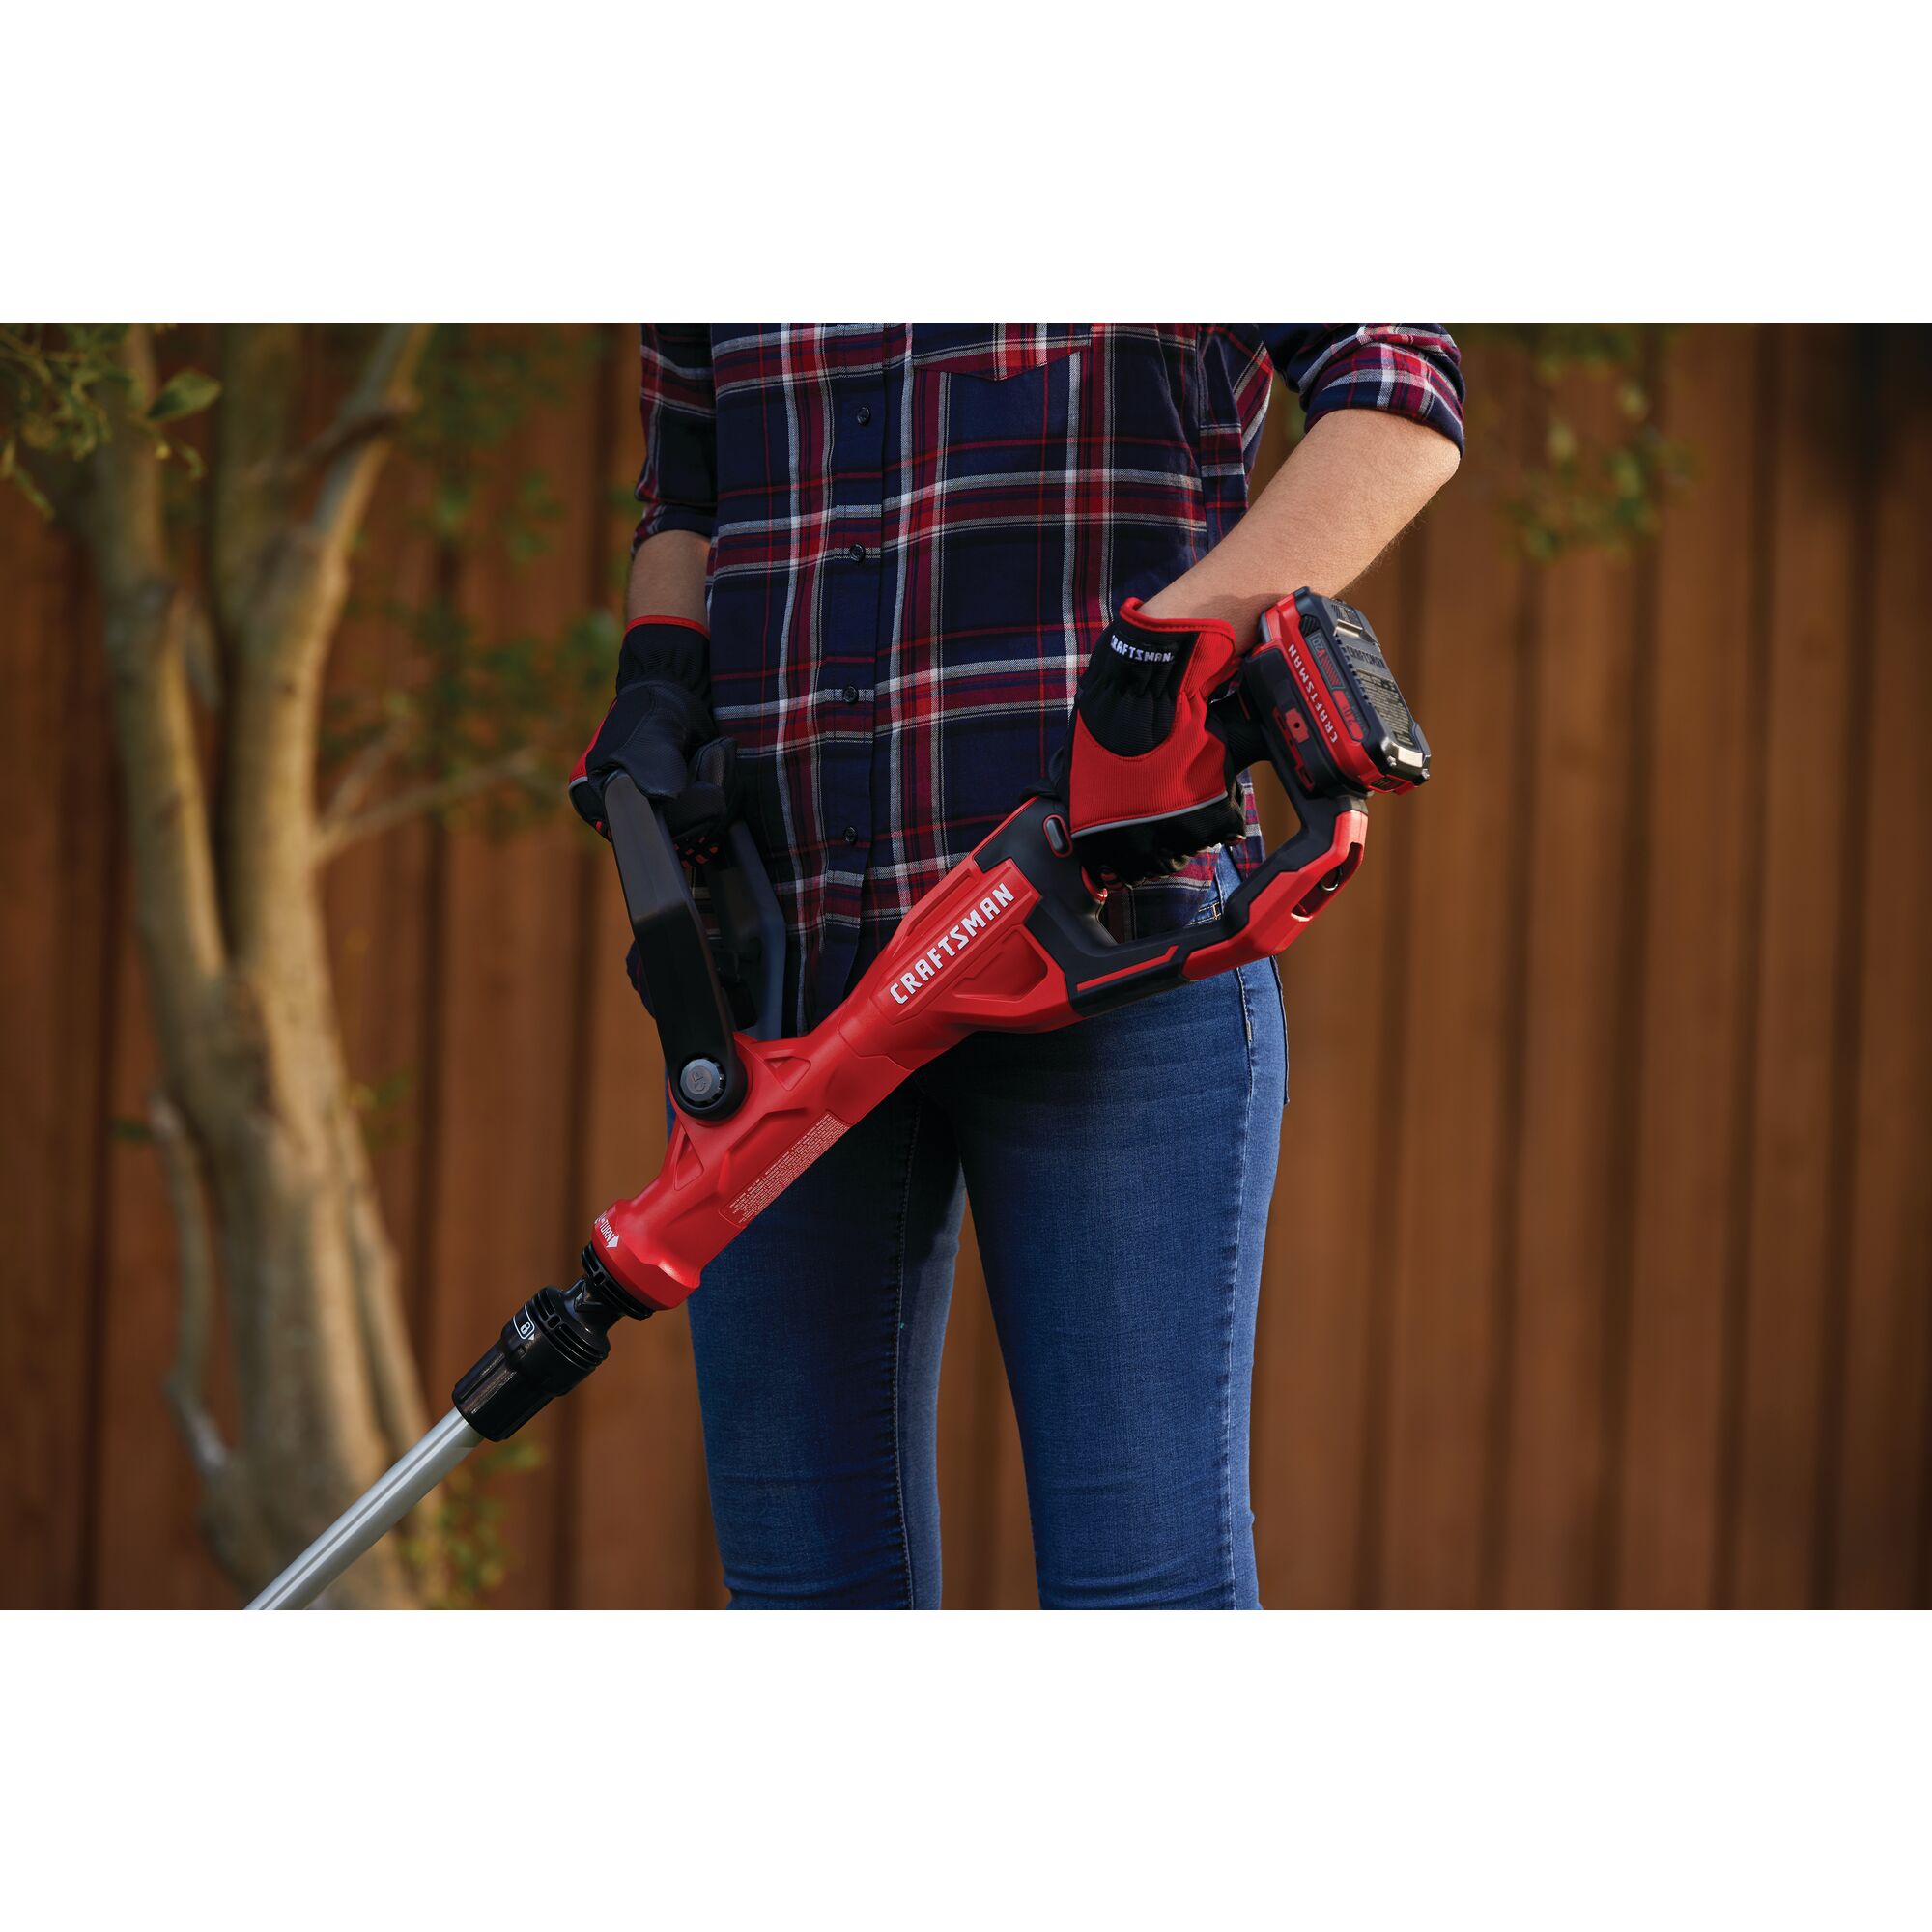 Assist handle feature of 20 volt weedwacker 13 inch cordless string trimmer and edger with automatic feed kit 2.0 ampere per hour.